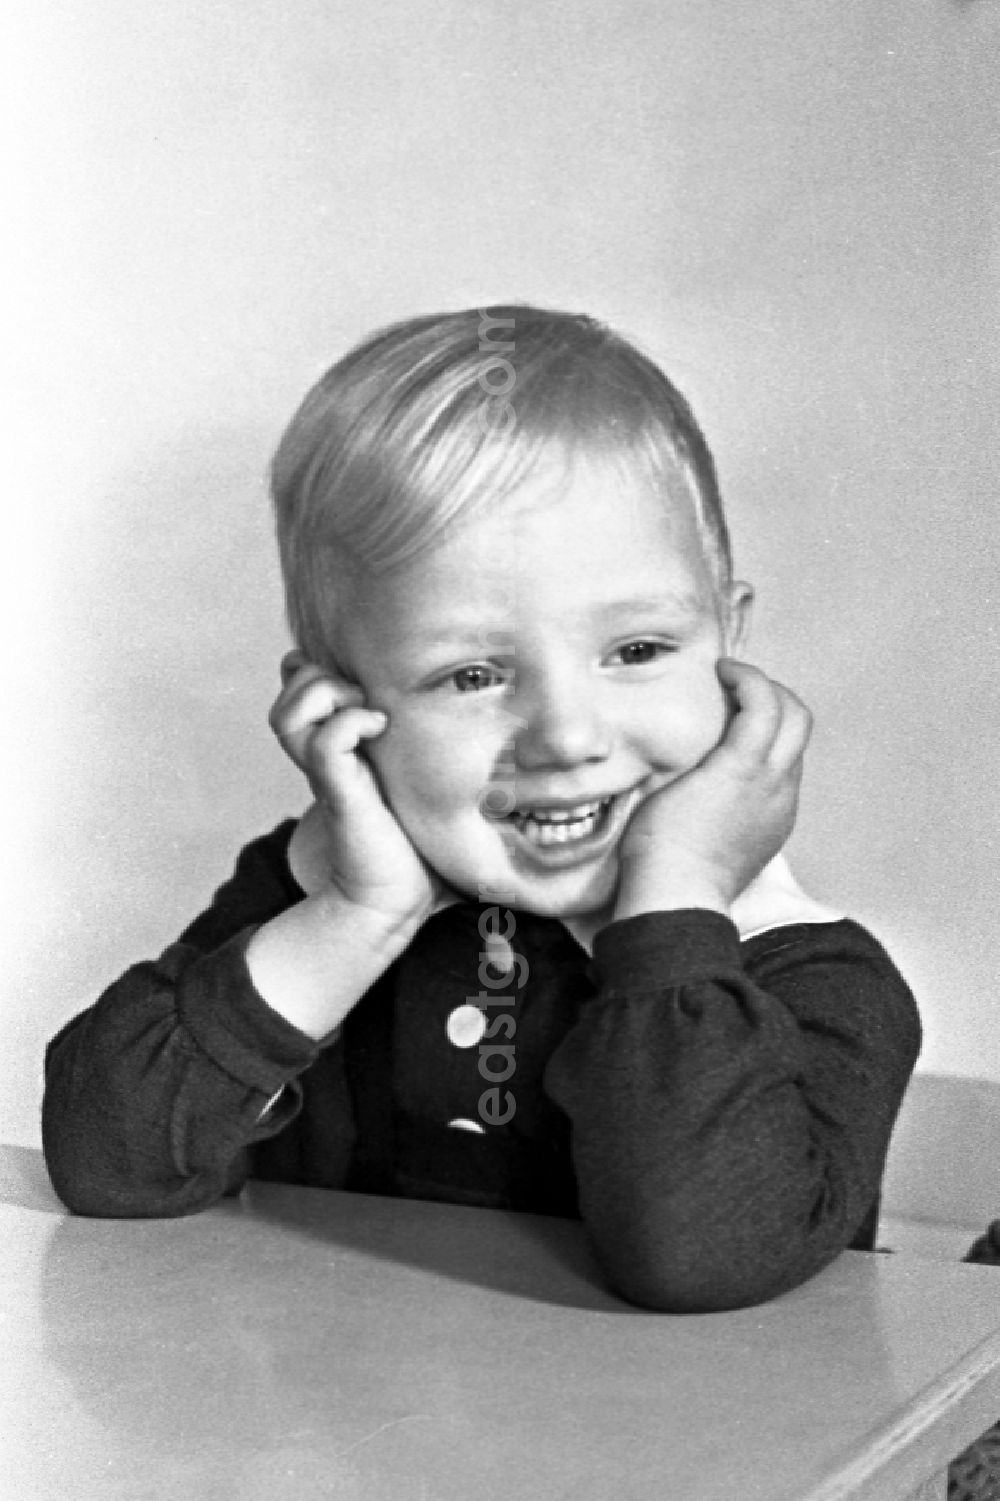 GDR image archive: Merseburg - A small boy in the portrait in Merseburg in the federal state Saxony-Anhalt in the area of the former GDR, German democratic republic